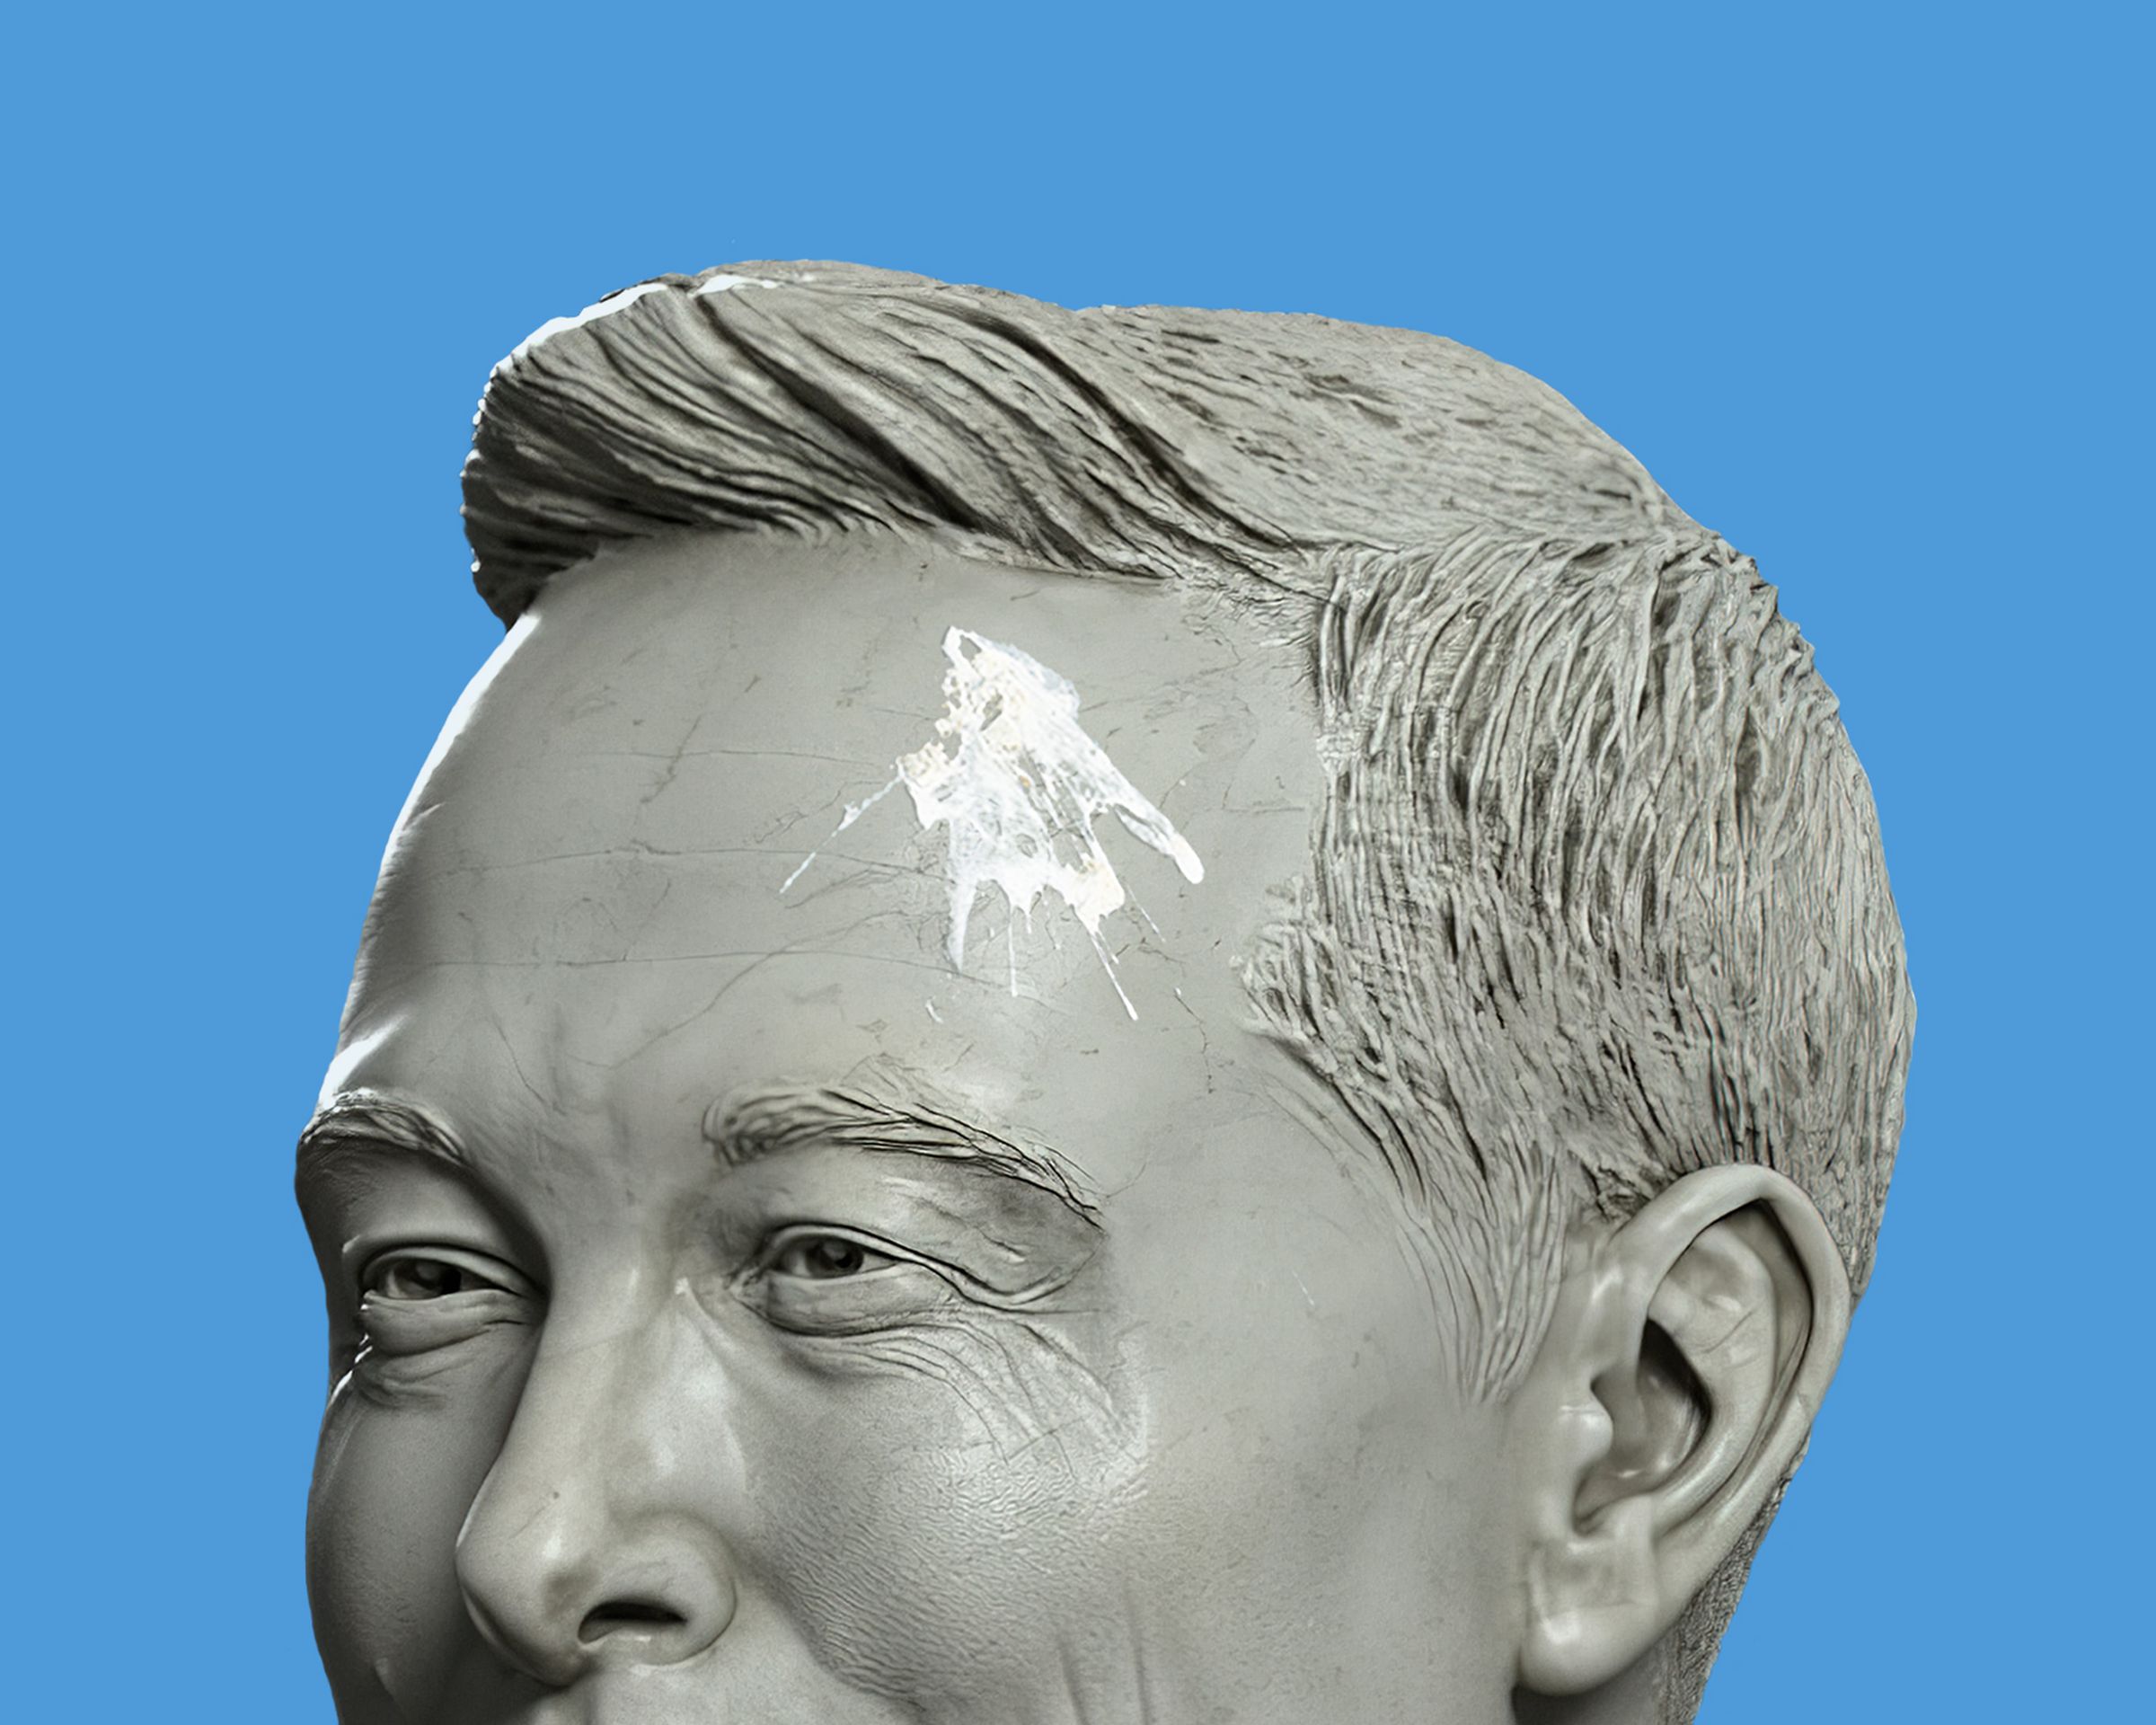 A statue bust of Elon Musk with bird droppings on its forehead over a blue background.